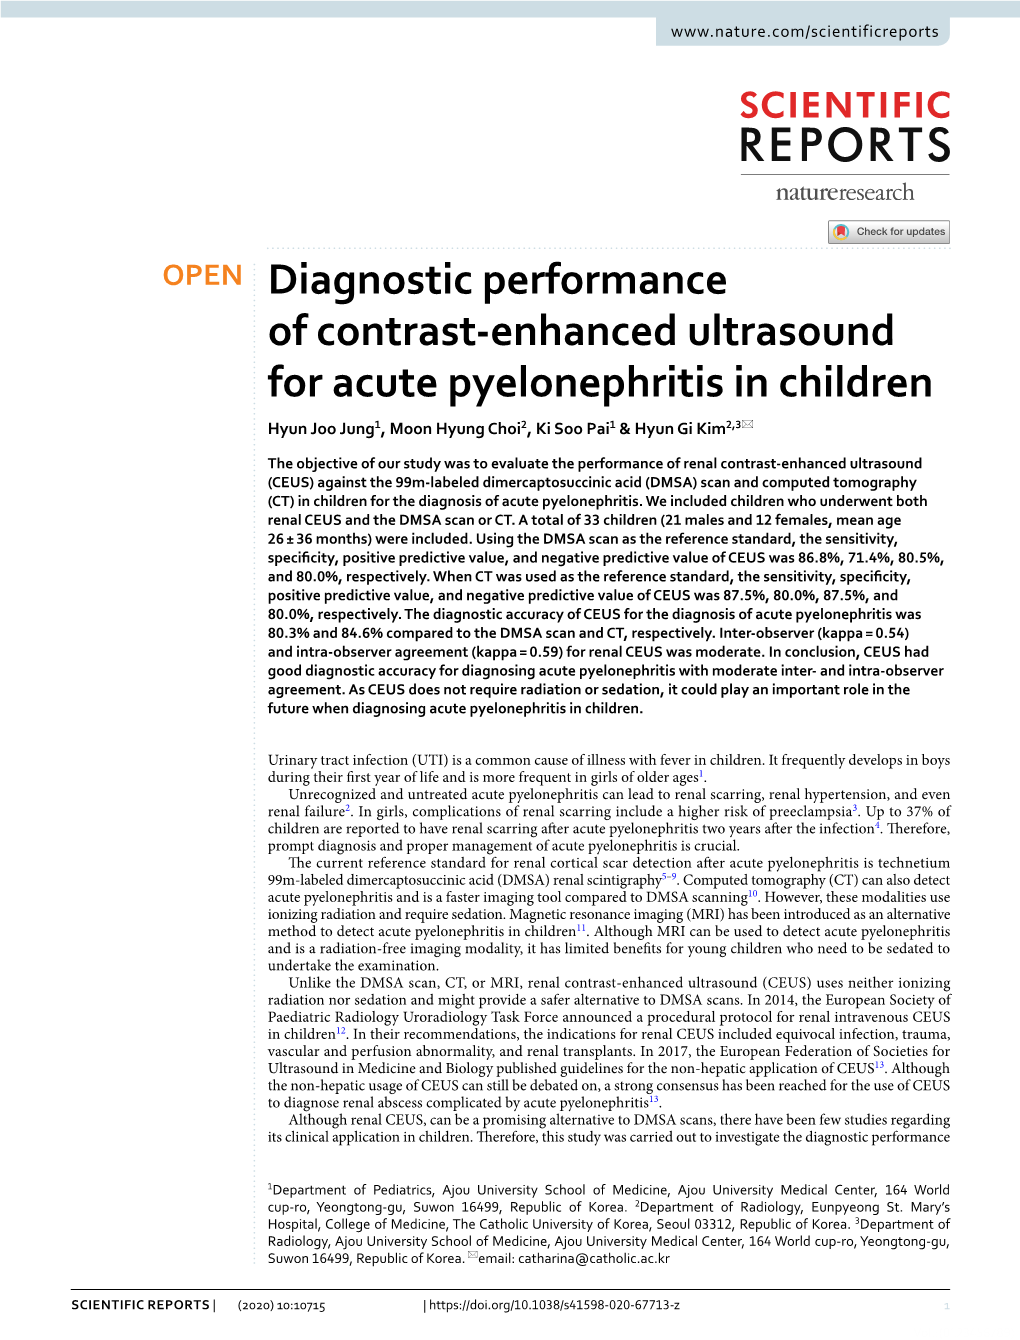 Diagnostic Performance of Contrast-Enhanced Ultrasound For